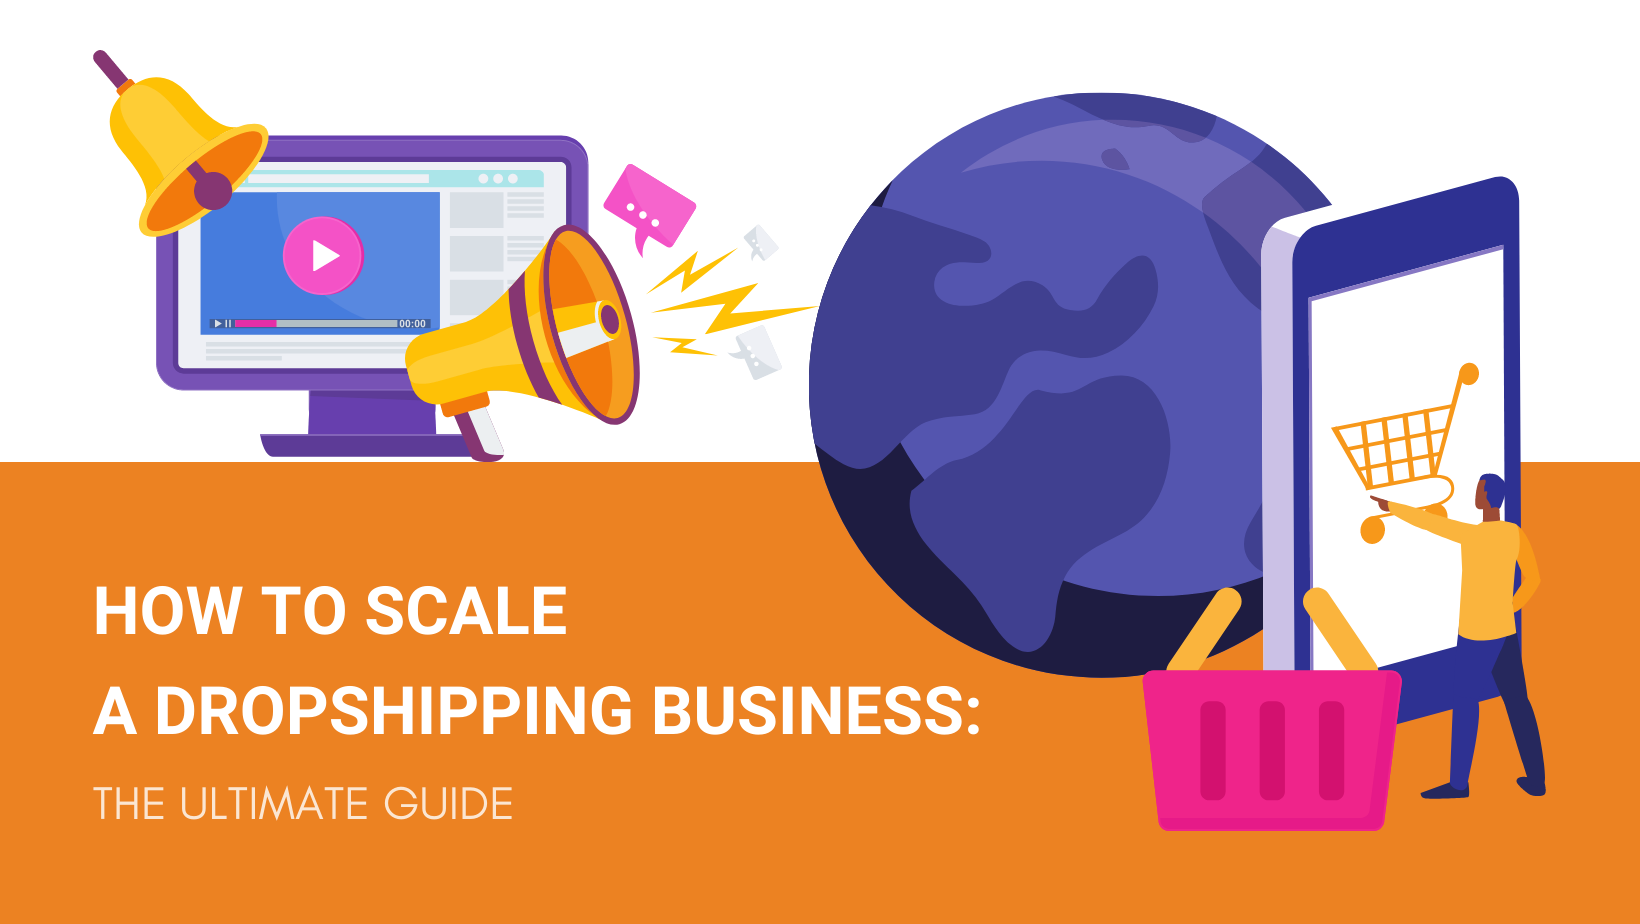 HOW TO SCALE A DROPSHIPPING BUSINESS THE ULTIMATE GUIDE